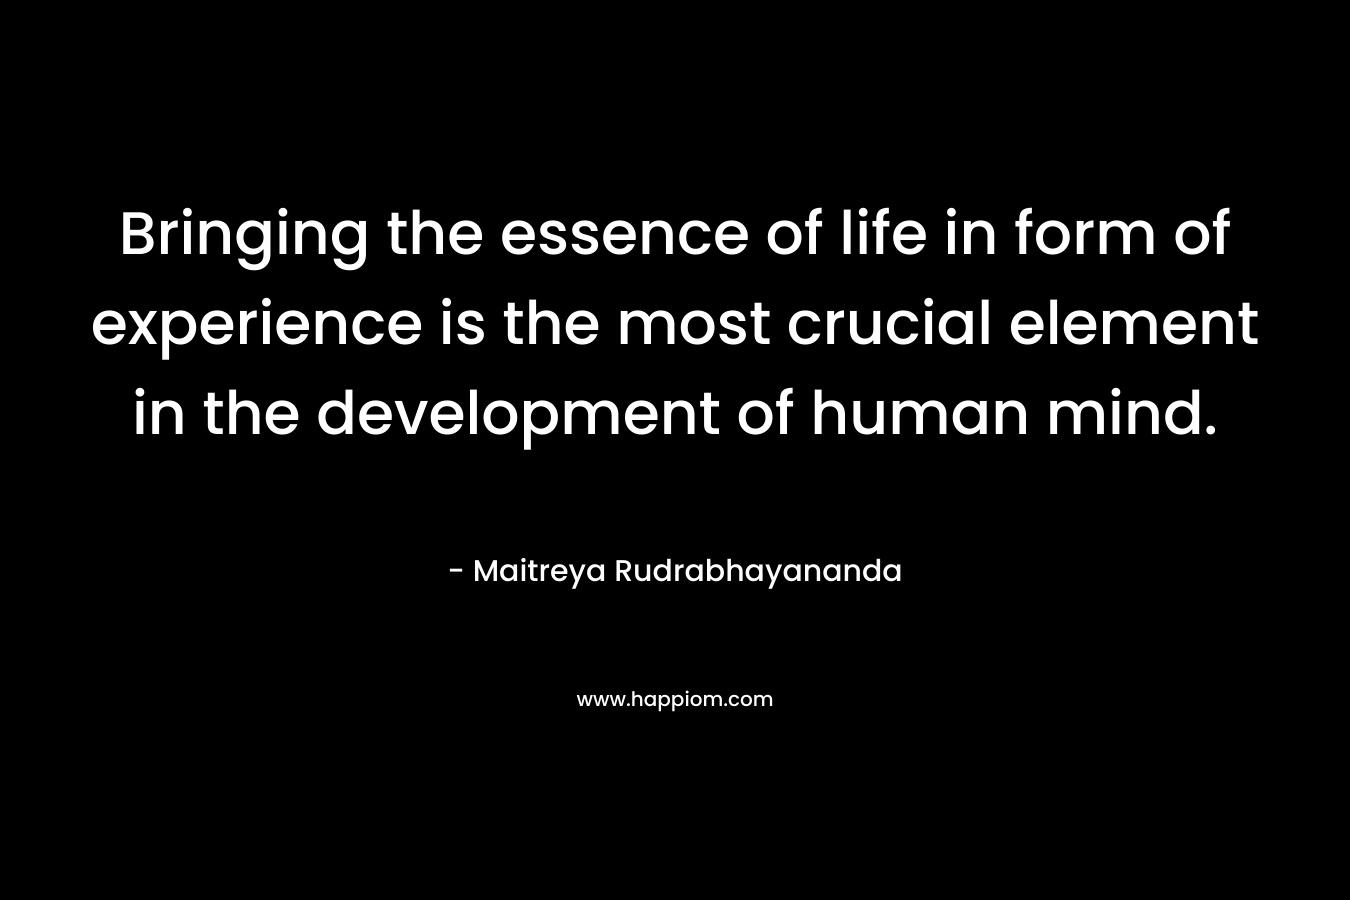 Bringing the essence of life in form of experience is the most crucial element in the development of human mind. – Maitreya Rudrabhayananda